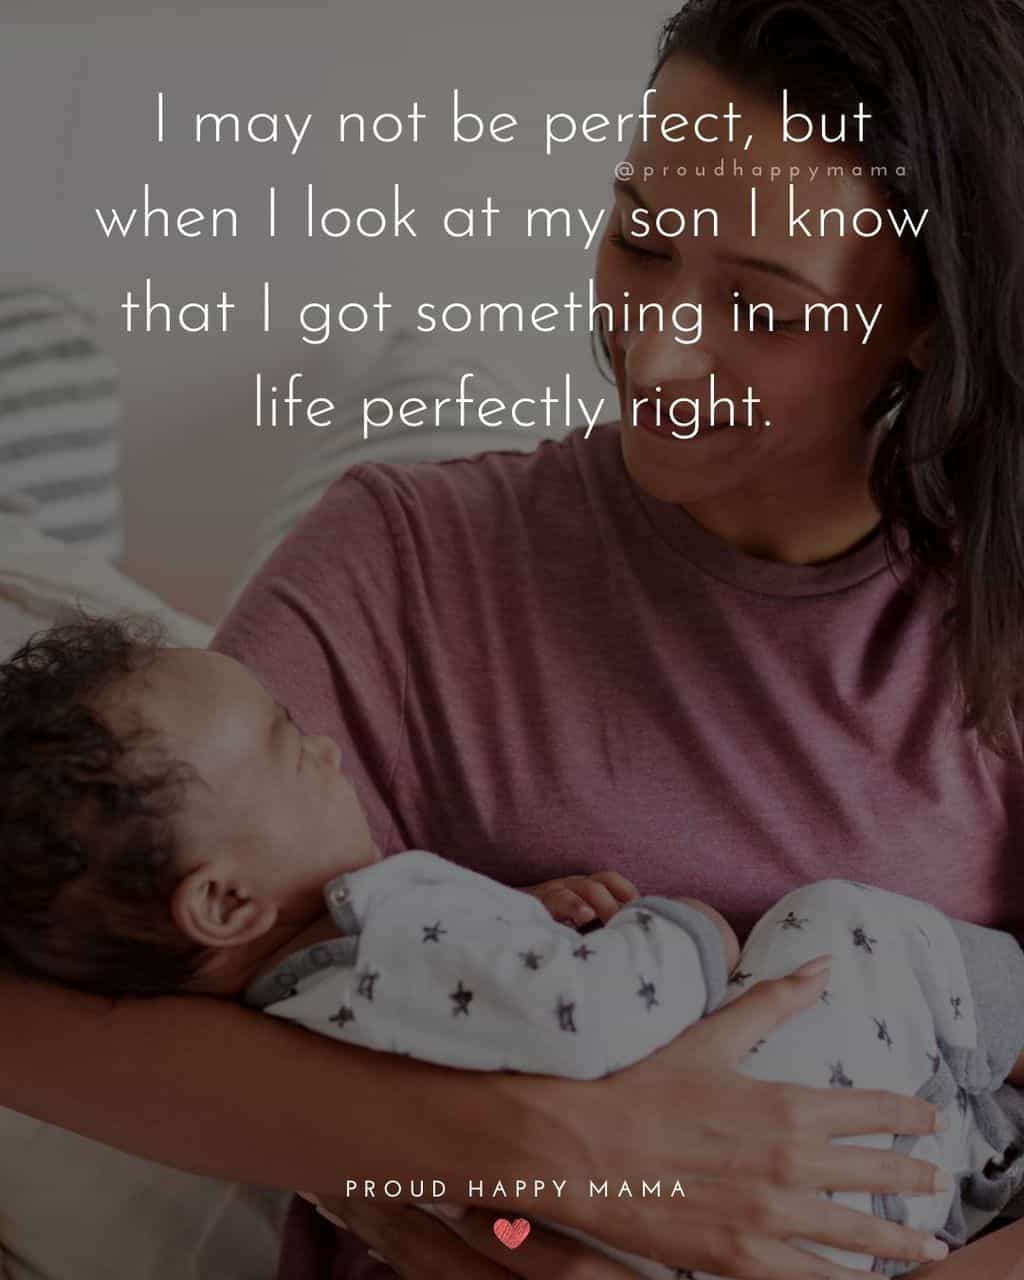 Son Quotes - I may not be perfect, but when I look at my son I know that I got something in my life perfectly right.’